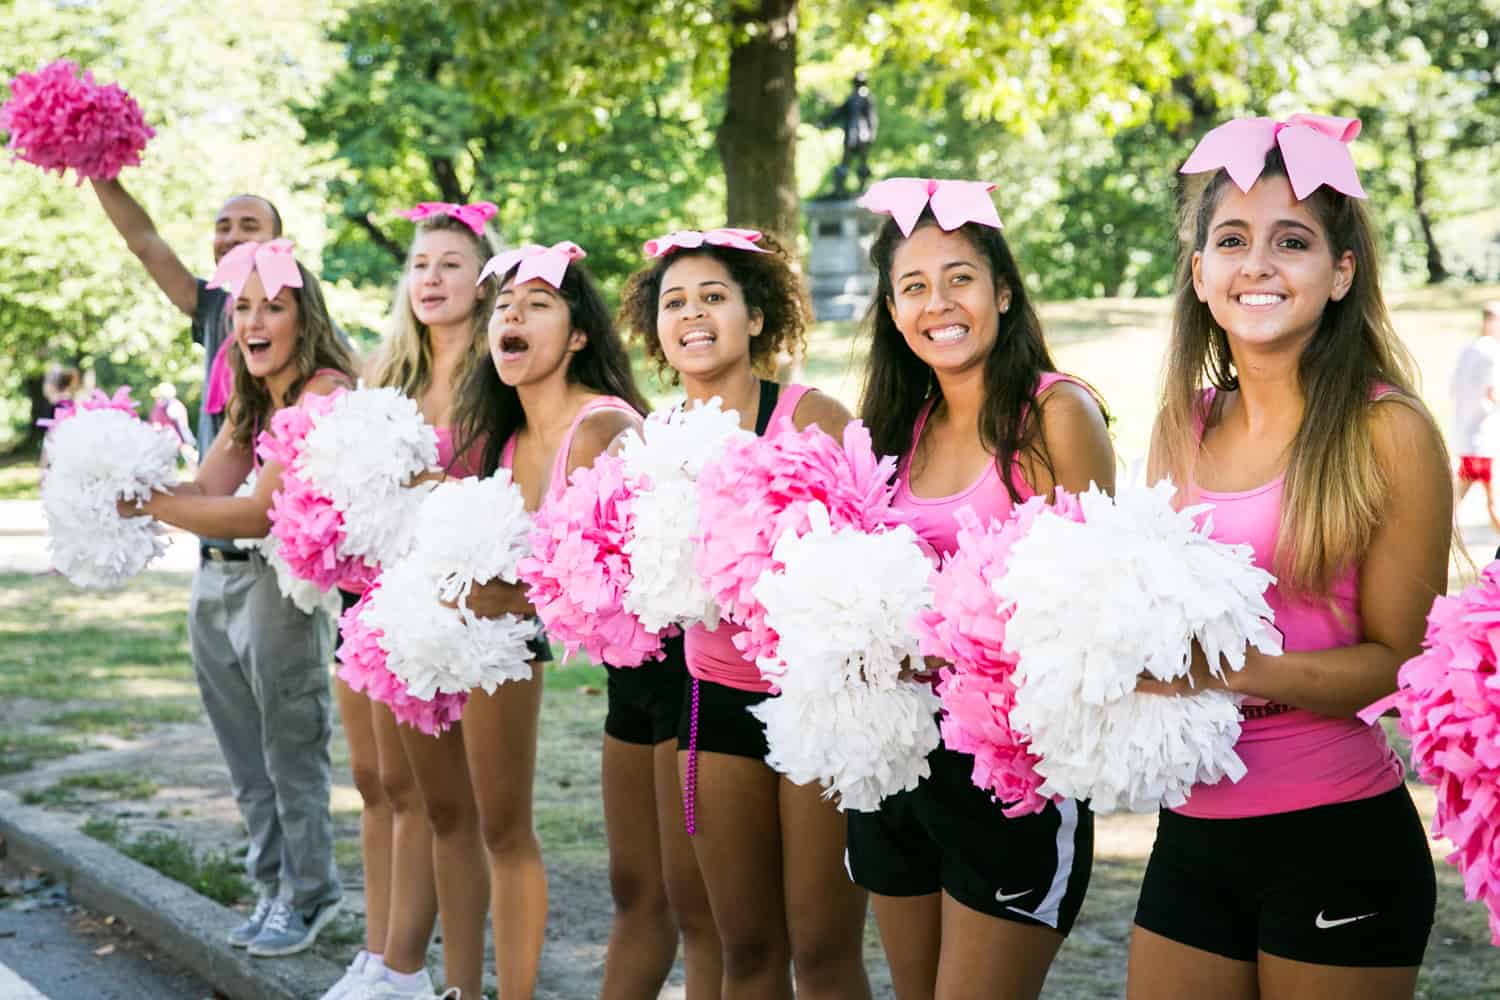 NYC Race for the Cure photos of line of cheerleaders